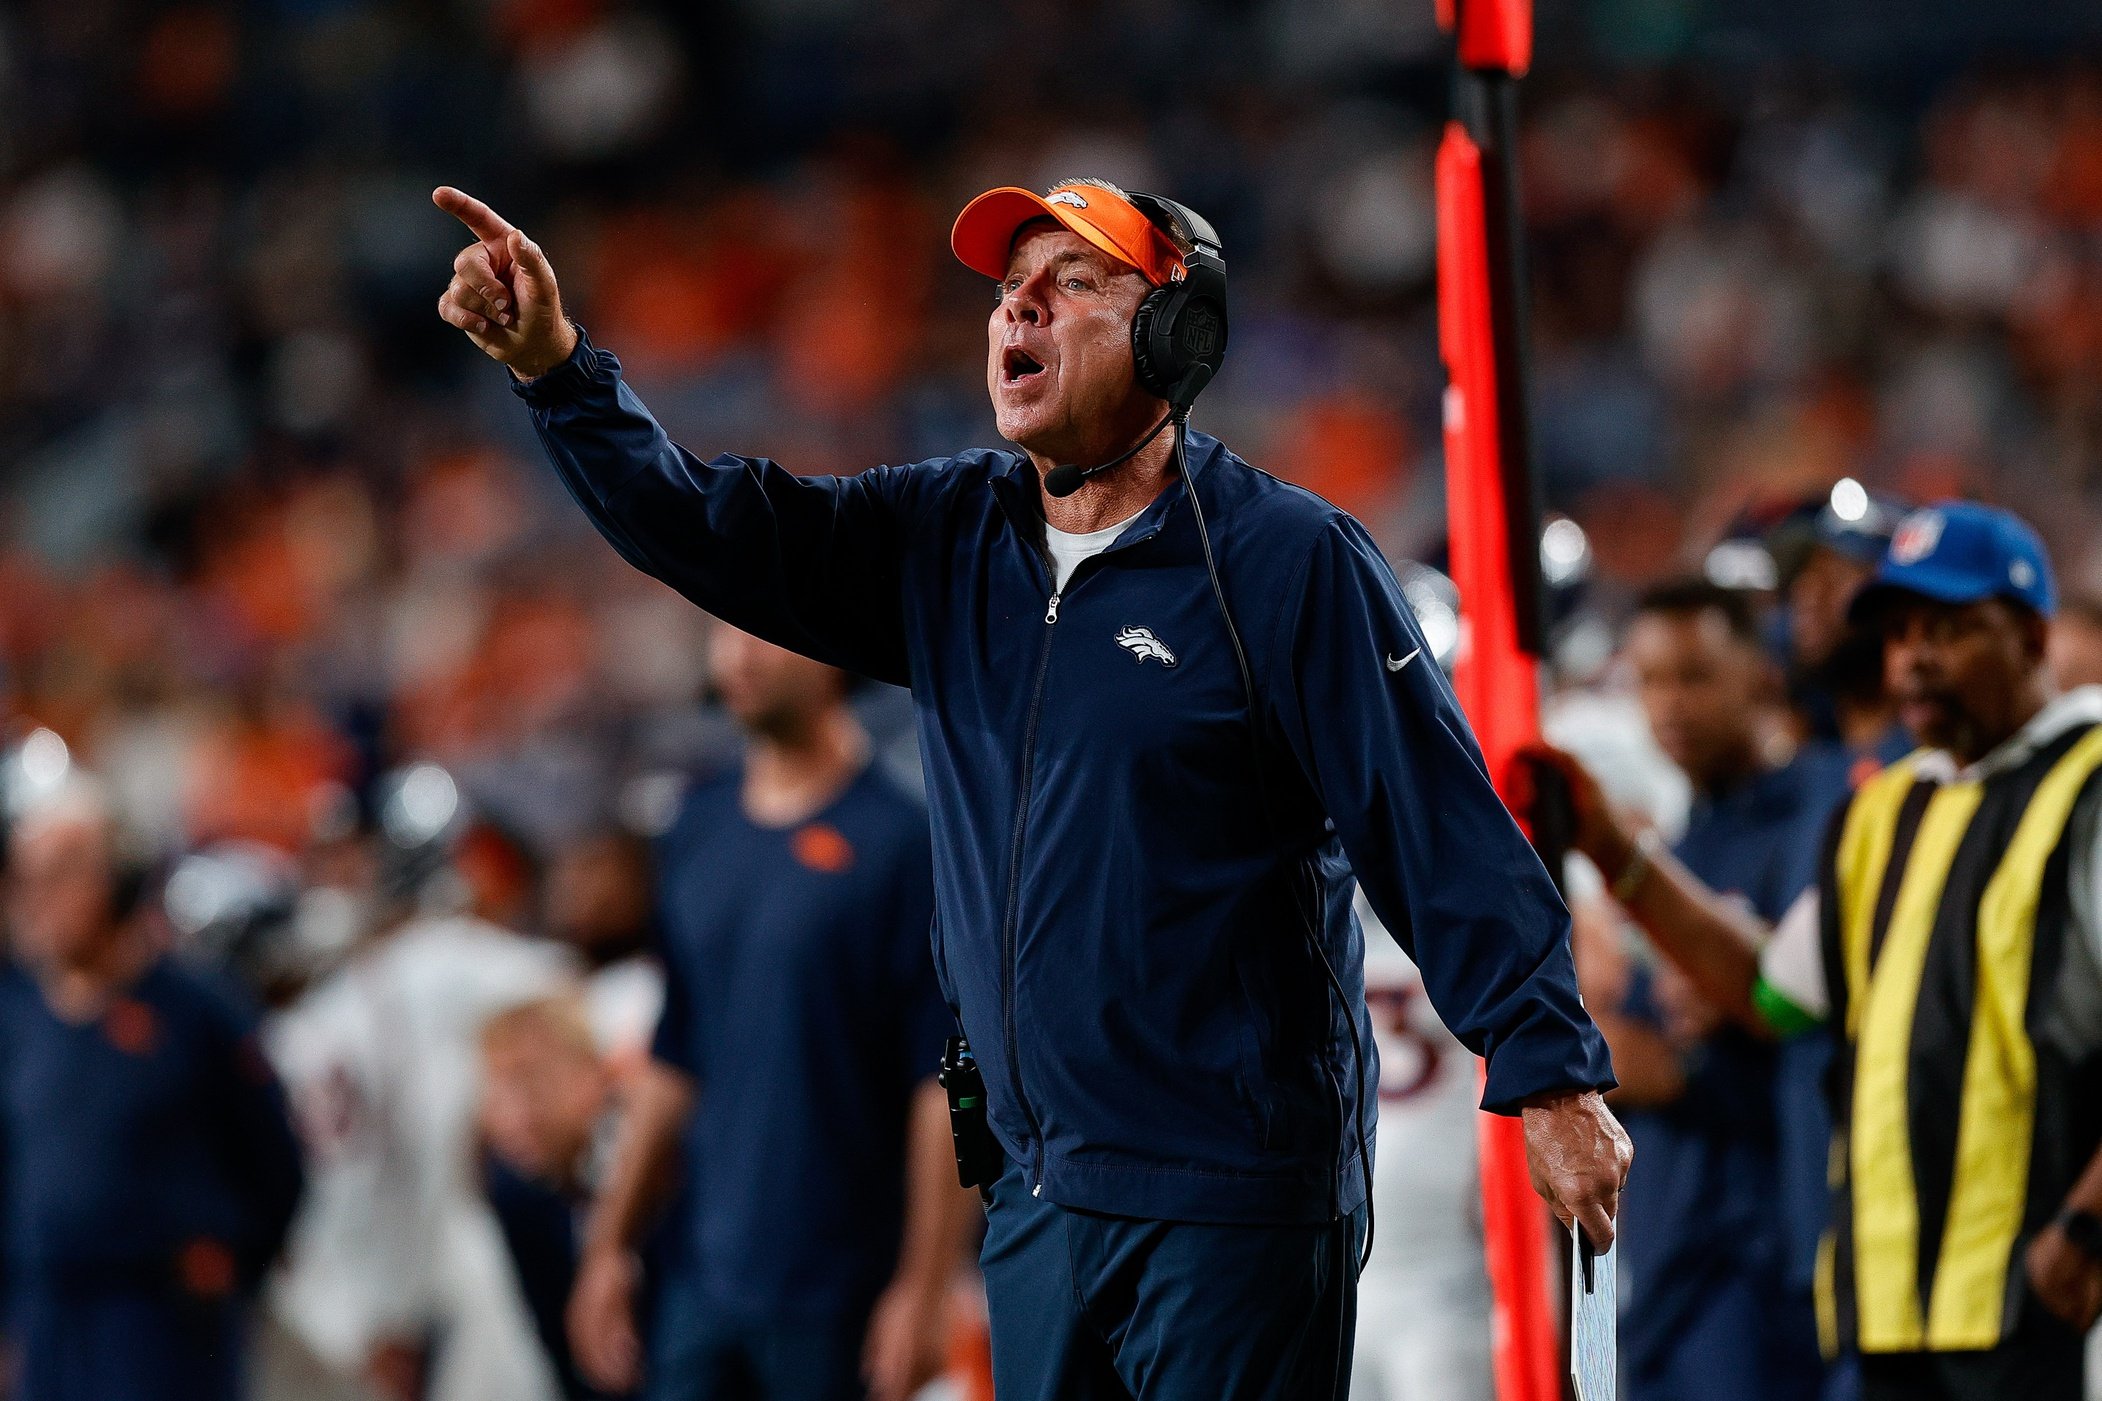 Denver Broncos head coach Sean Payton gestures in the fourth quarter against the Los Angeles Rams at Empower Field at Mile High. Mandatory Credit: Isaiah J. Downing-USA TODAY Sports